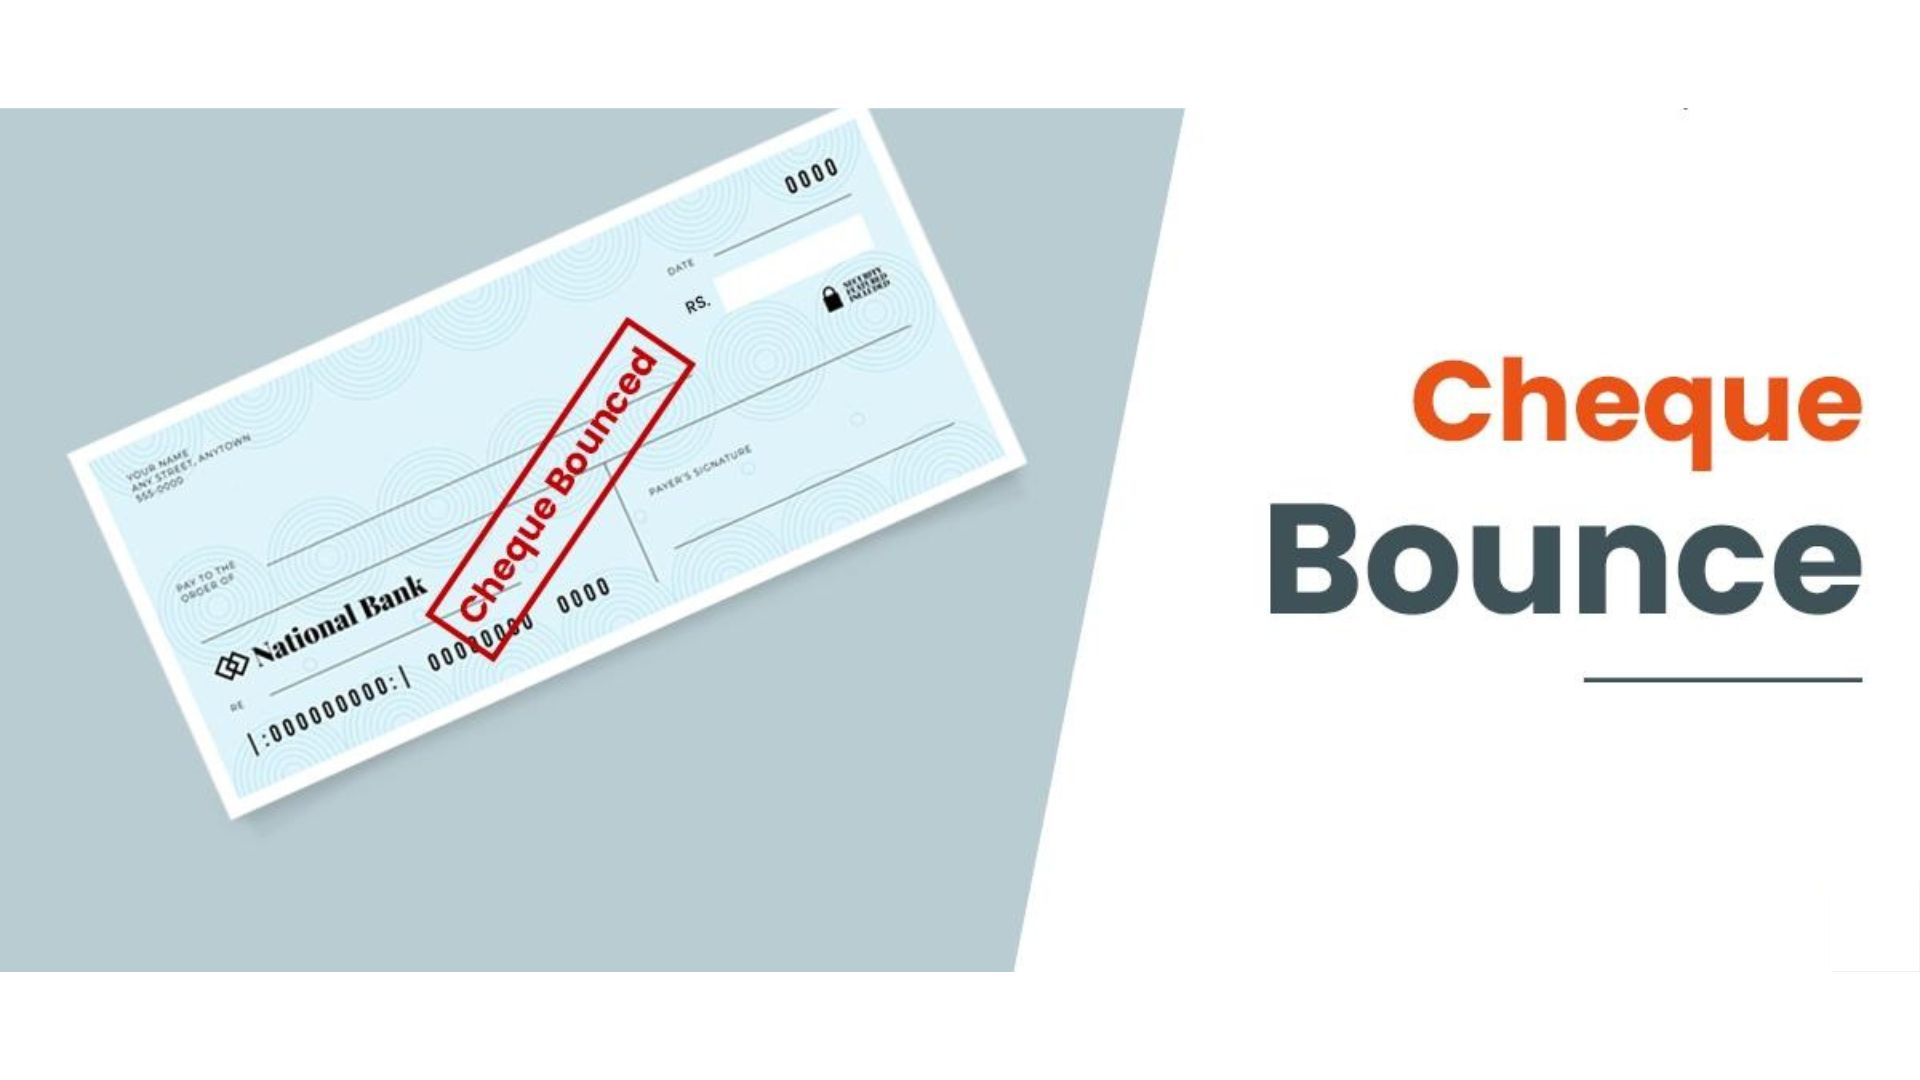 How to defend a Cheque Bounce case